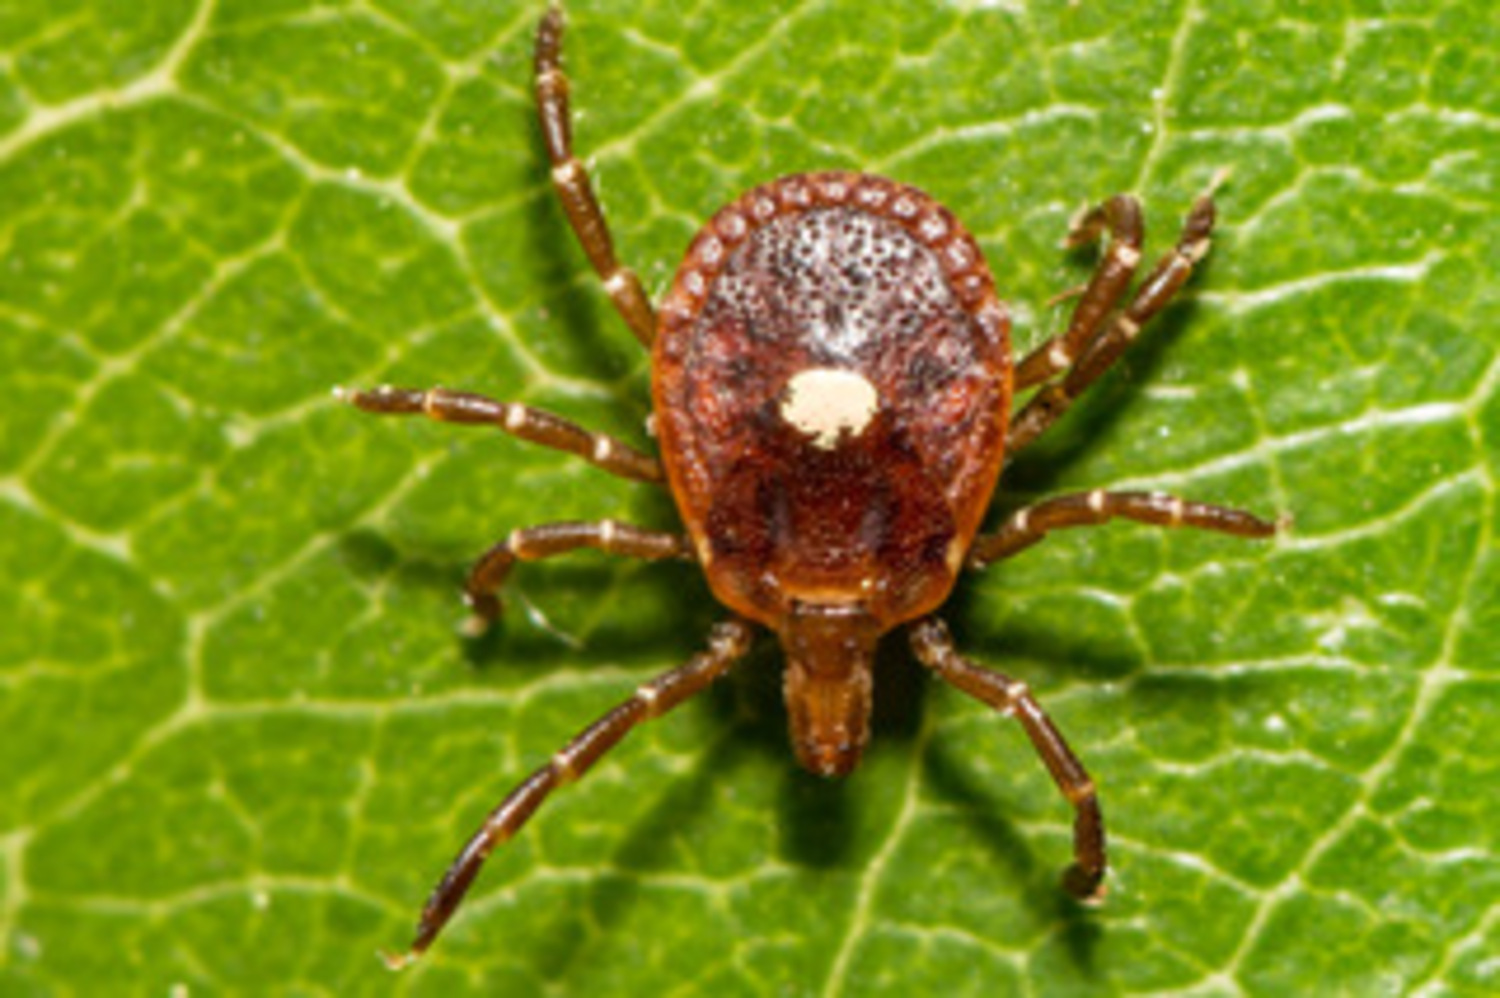 Lone Star ticks have become the dominant tick species on the East End, transmitting various diseases including the alpa gal meat allergy.